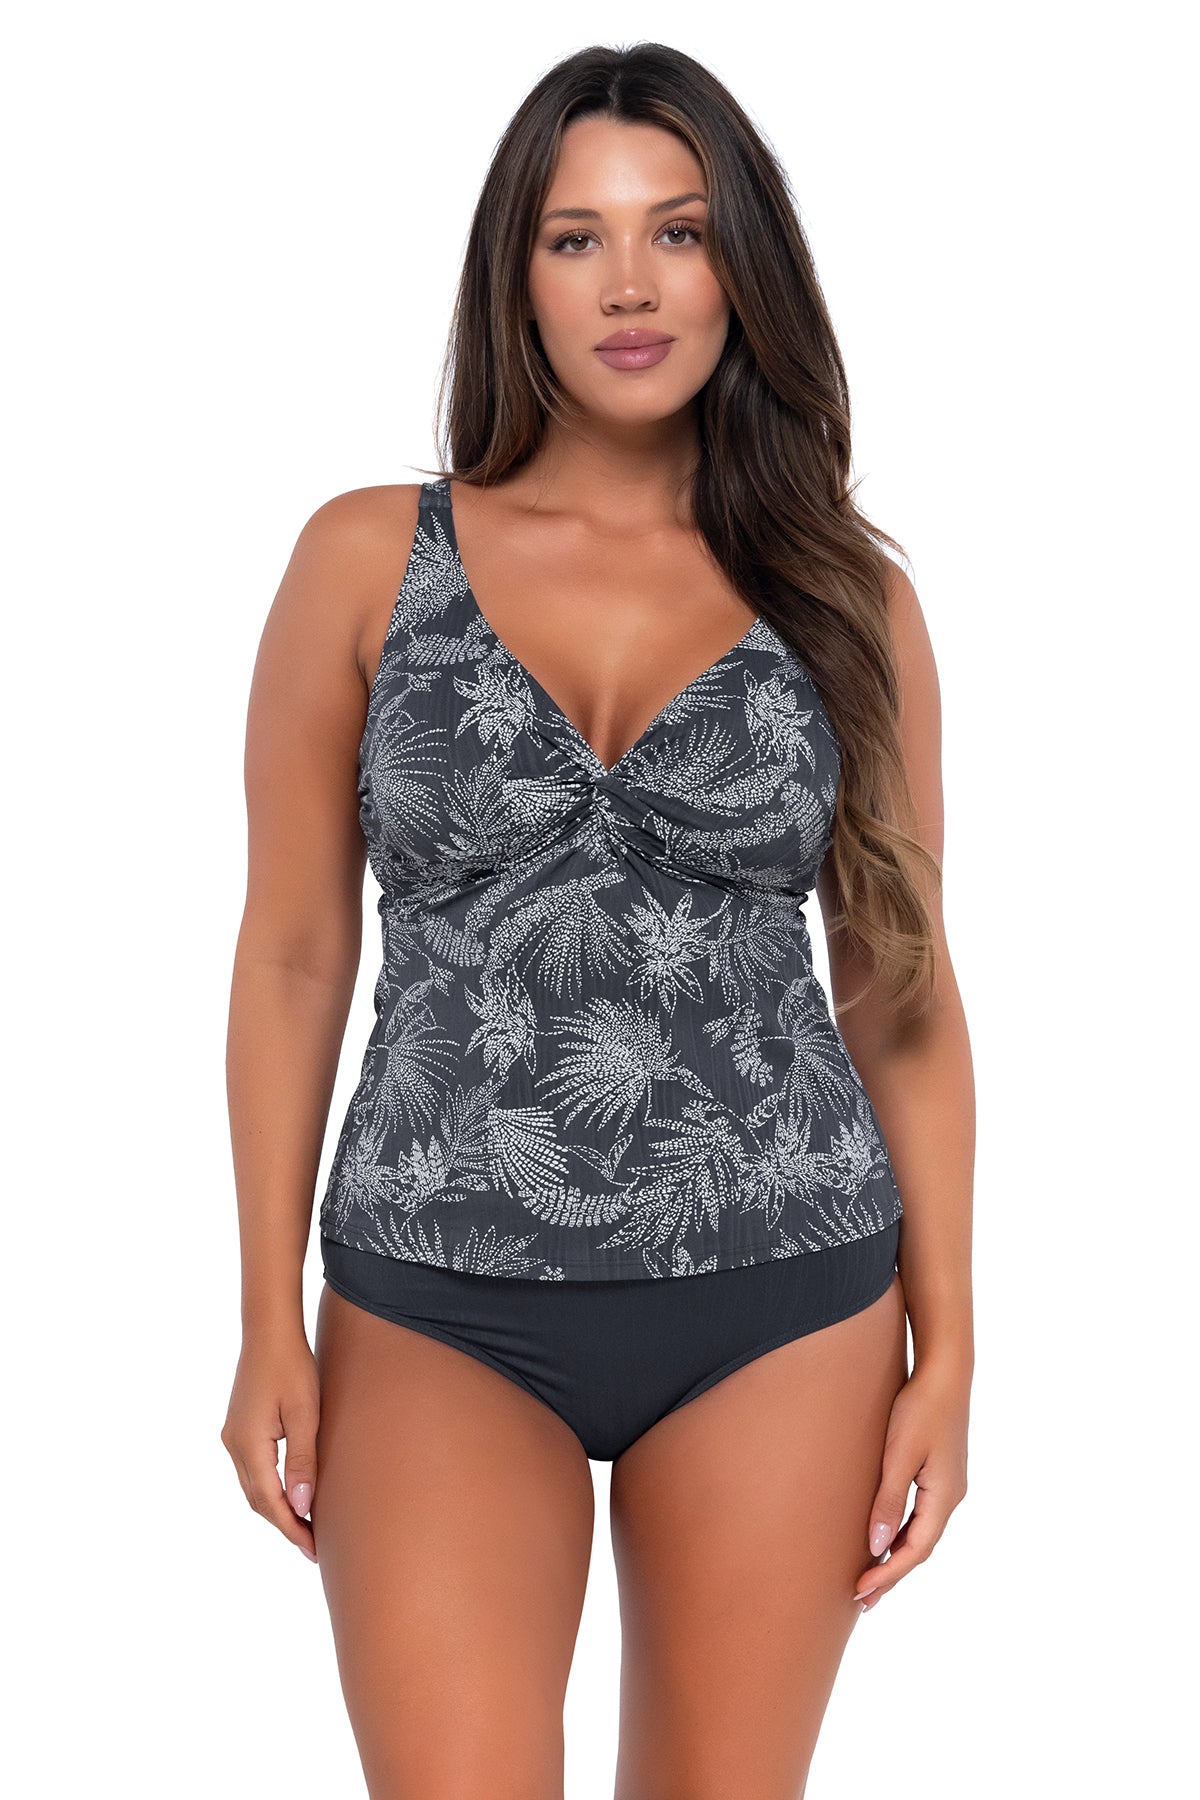 Sunsets Fanfare Seagrass Texture Forever Tankini Top